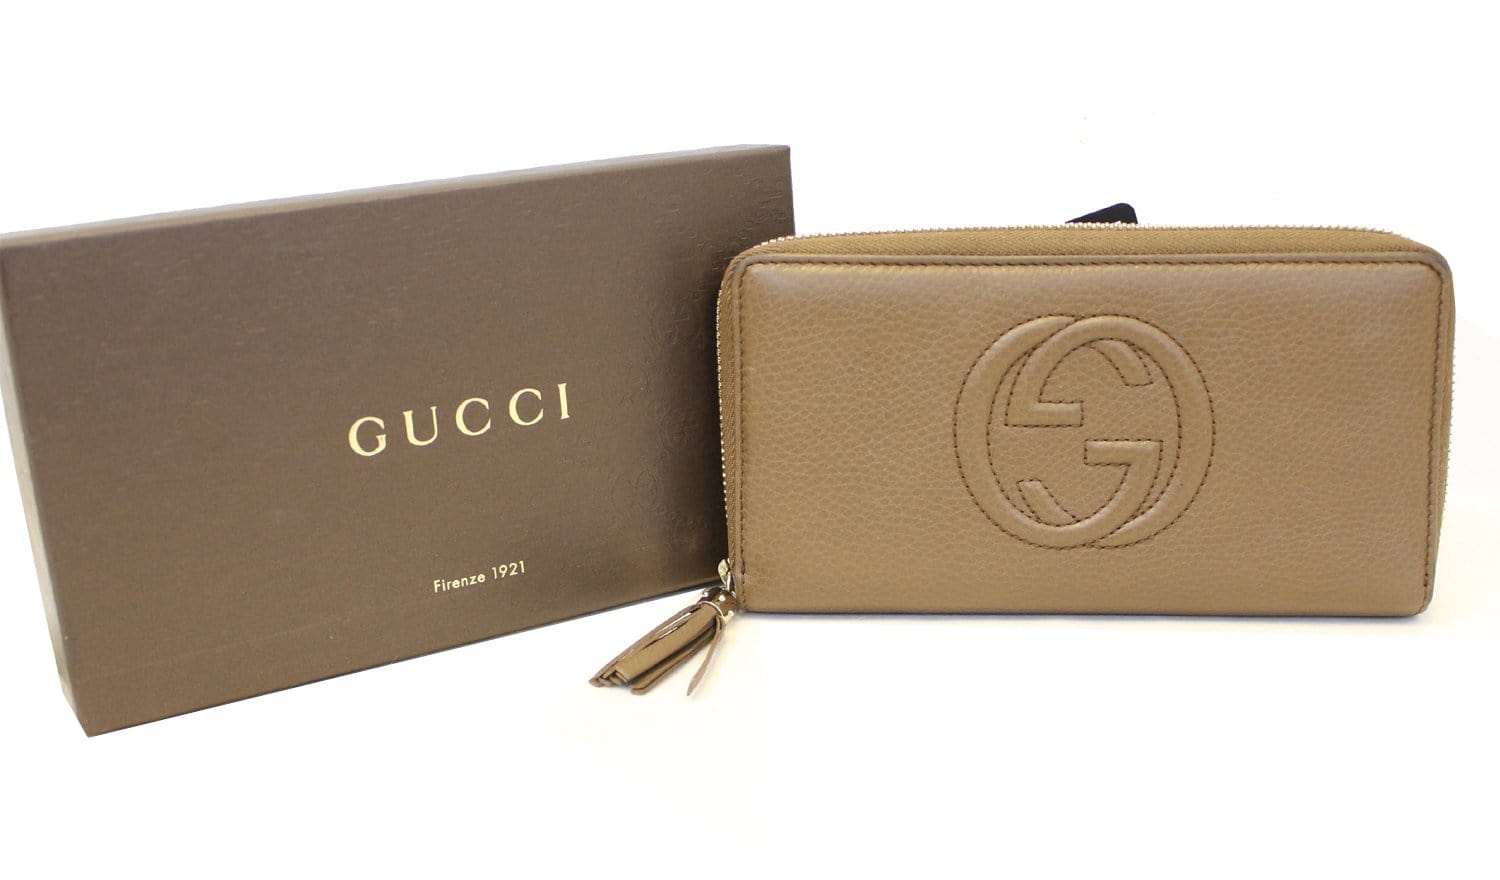 GUCCI VINTAGE GUCCISSIMA GG INTERLOCKING LEATHER LONG WALLET MEN BROWN  ITALY